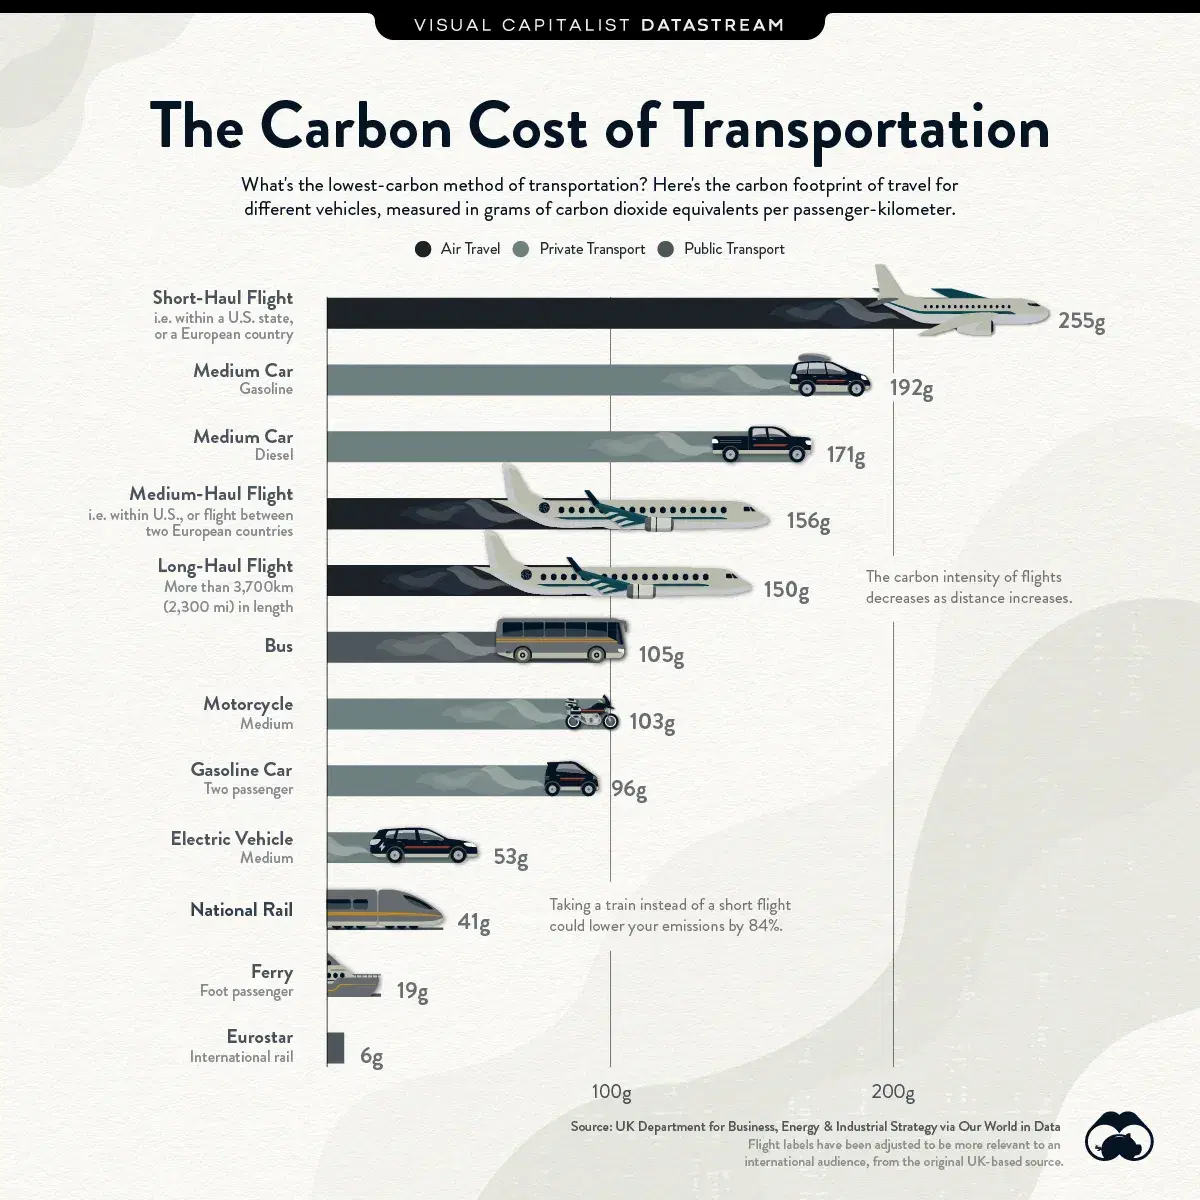 Comparing the Carbon Footprint of Transportation Options